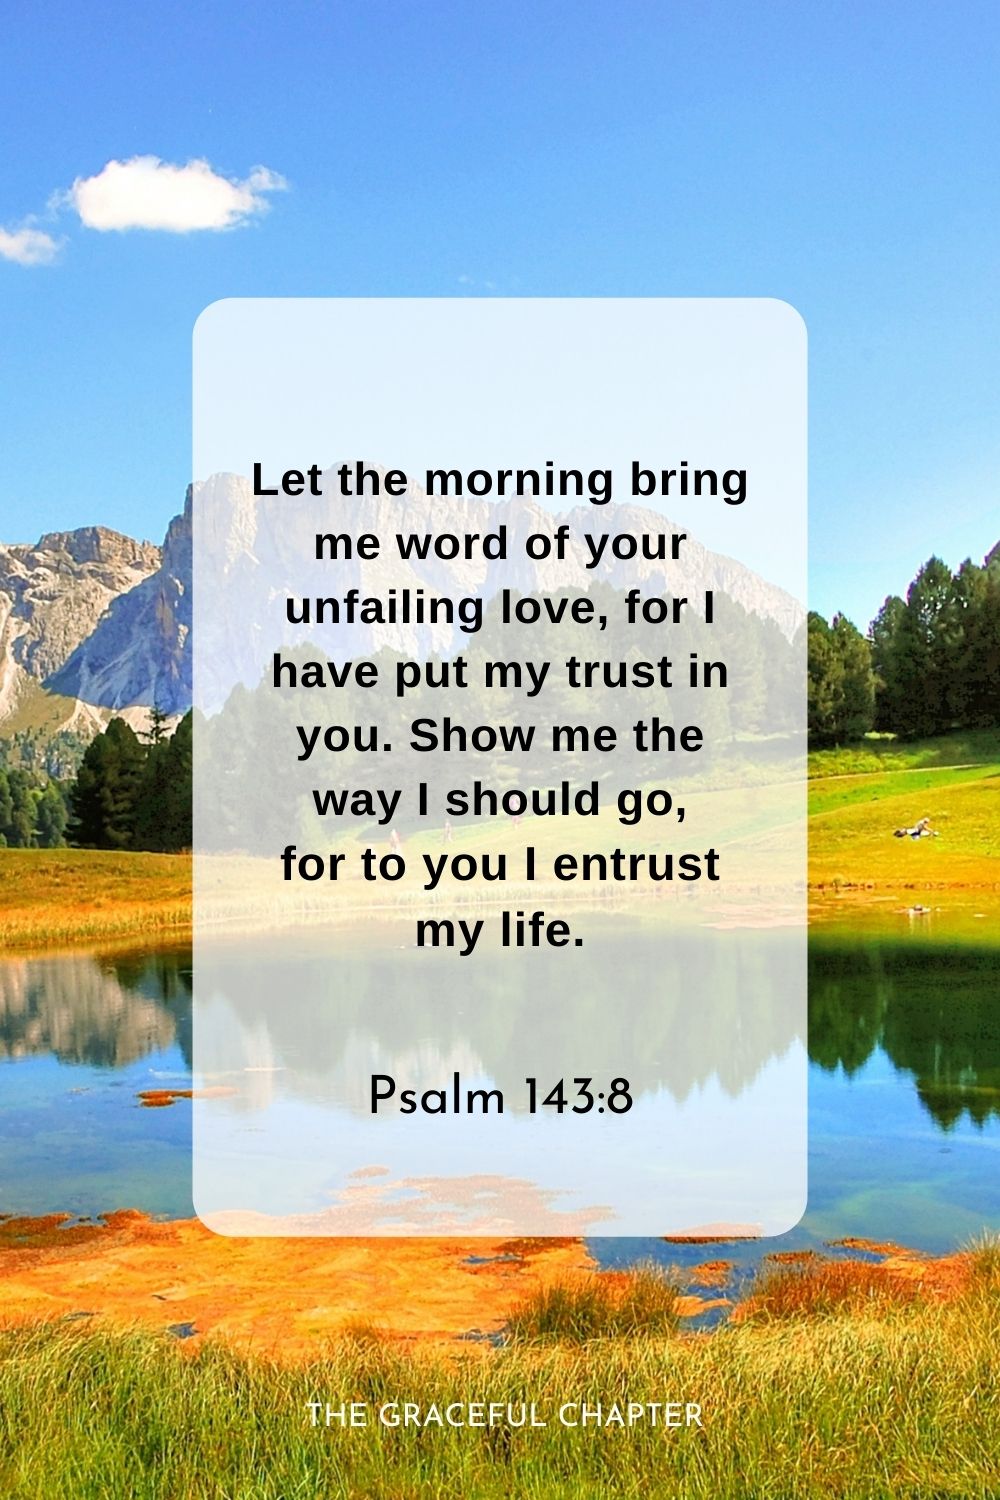 Let the morning bring me word of your unfailing love, for I have put my trust in you. Show me the way I should go, for to you I entrust my life.